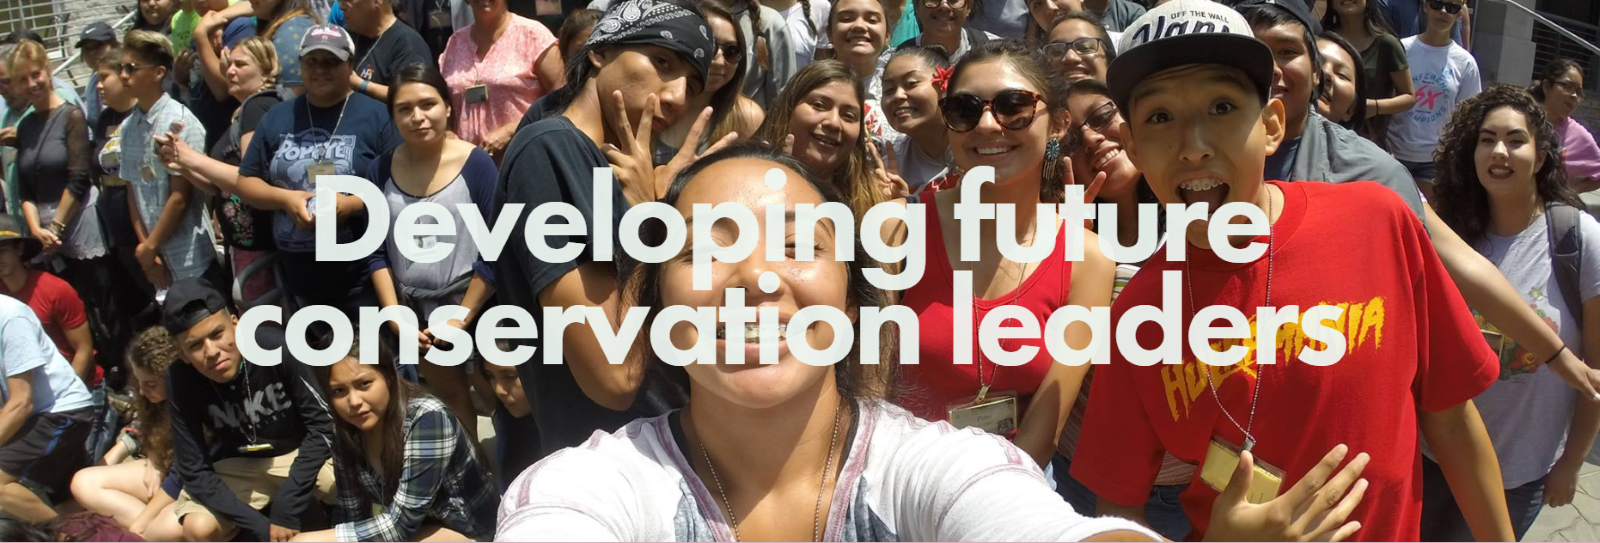 Developing future conservation leaders